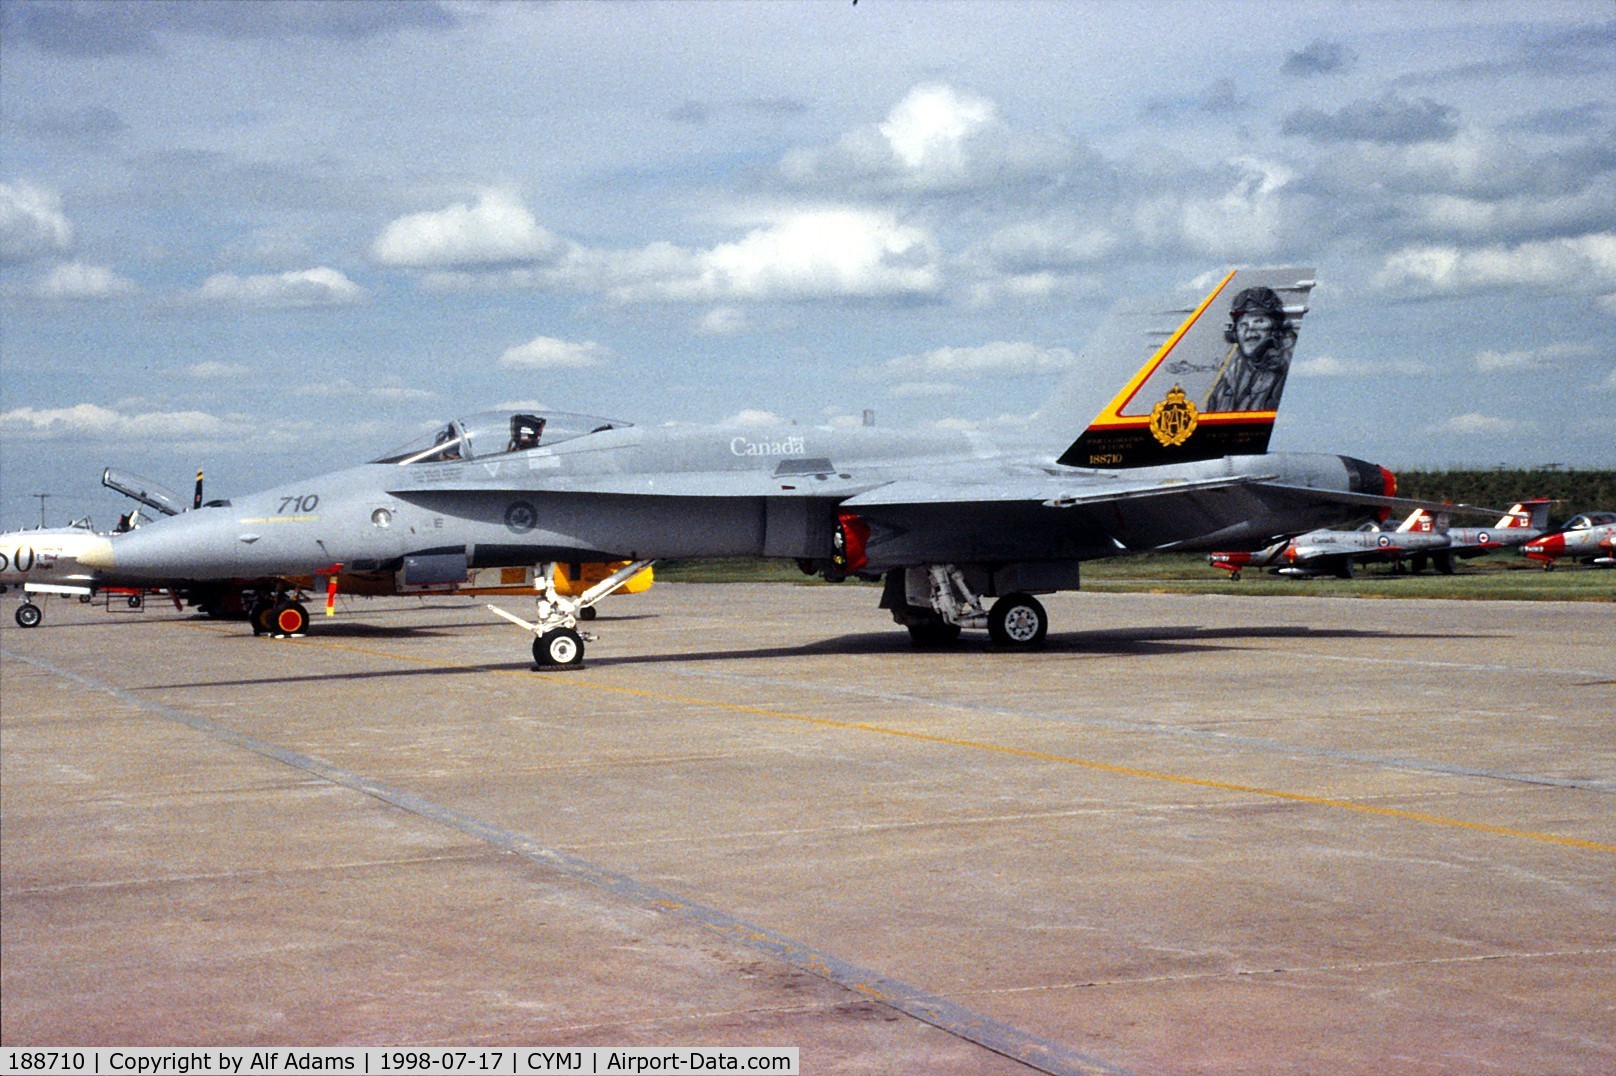 188710, McDonnell Douglas CF-188A Hornet C/N 0137/A103, Displayed at the airshow at Canadian Forces Base, Moose Jaw, Saskatchewan, Canada in 1998.